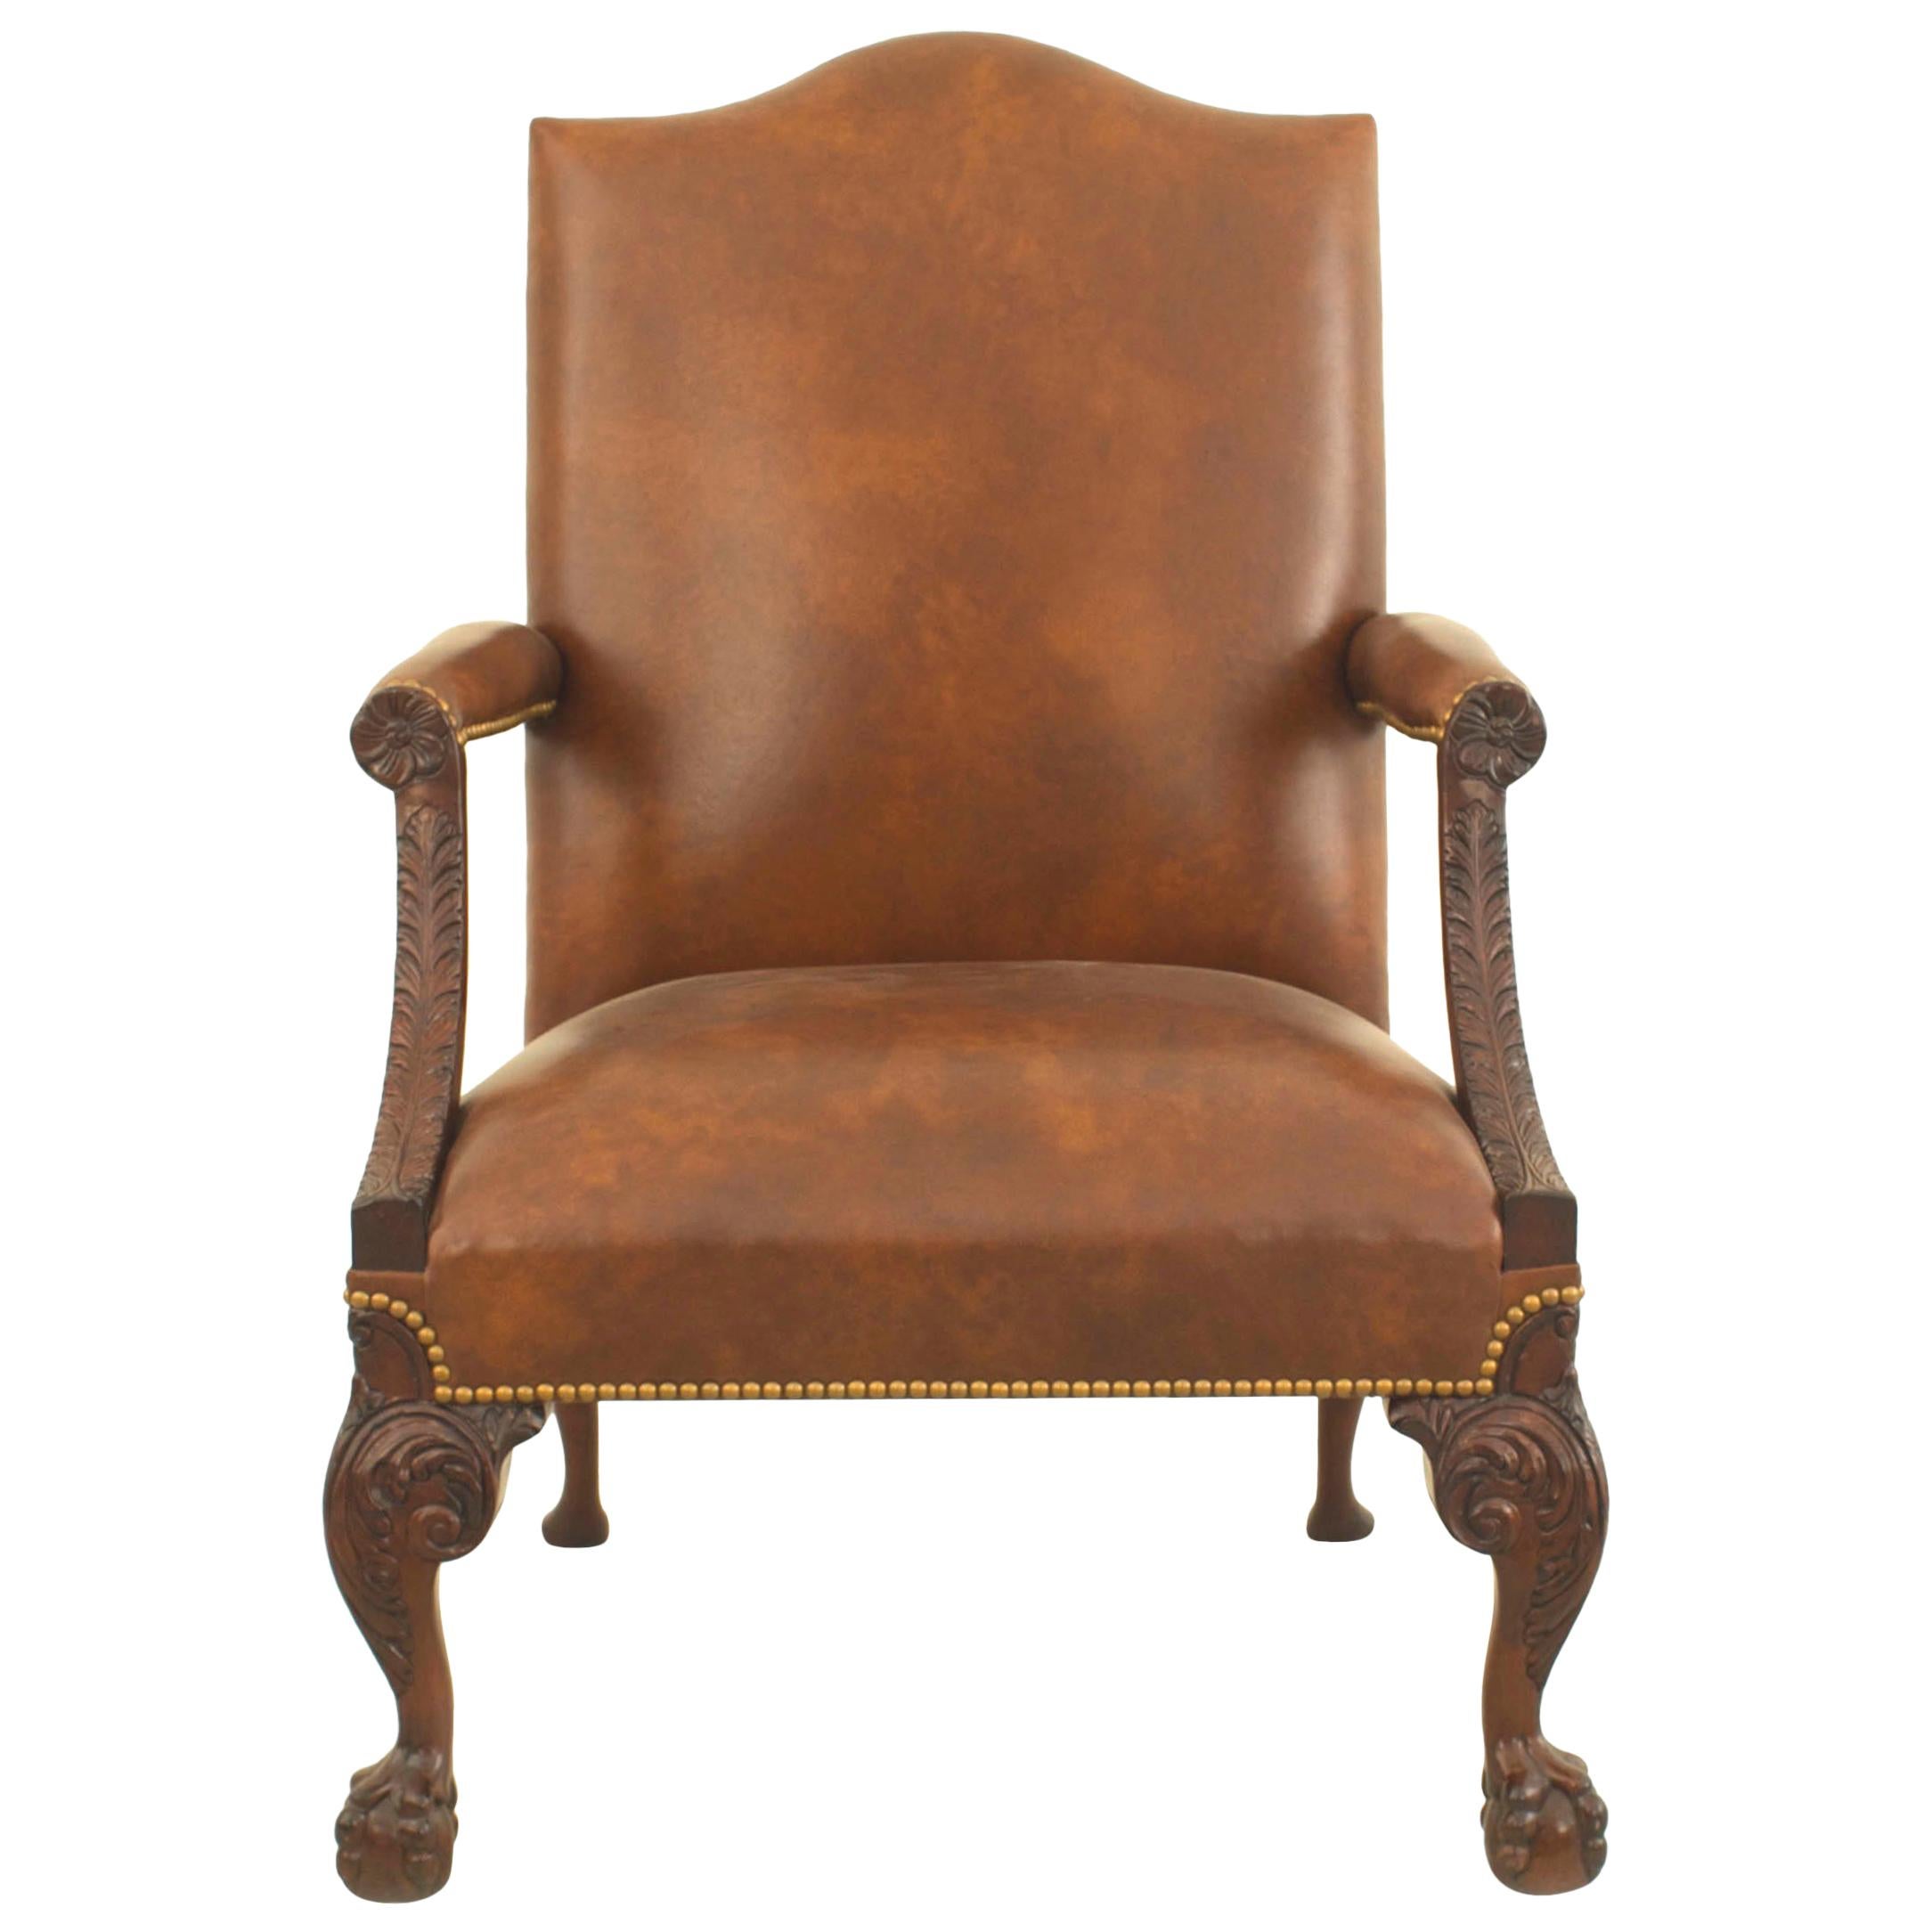 English Chippendale Style Mahogany Carved Open Armchair